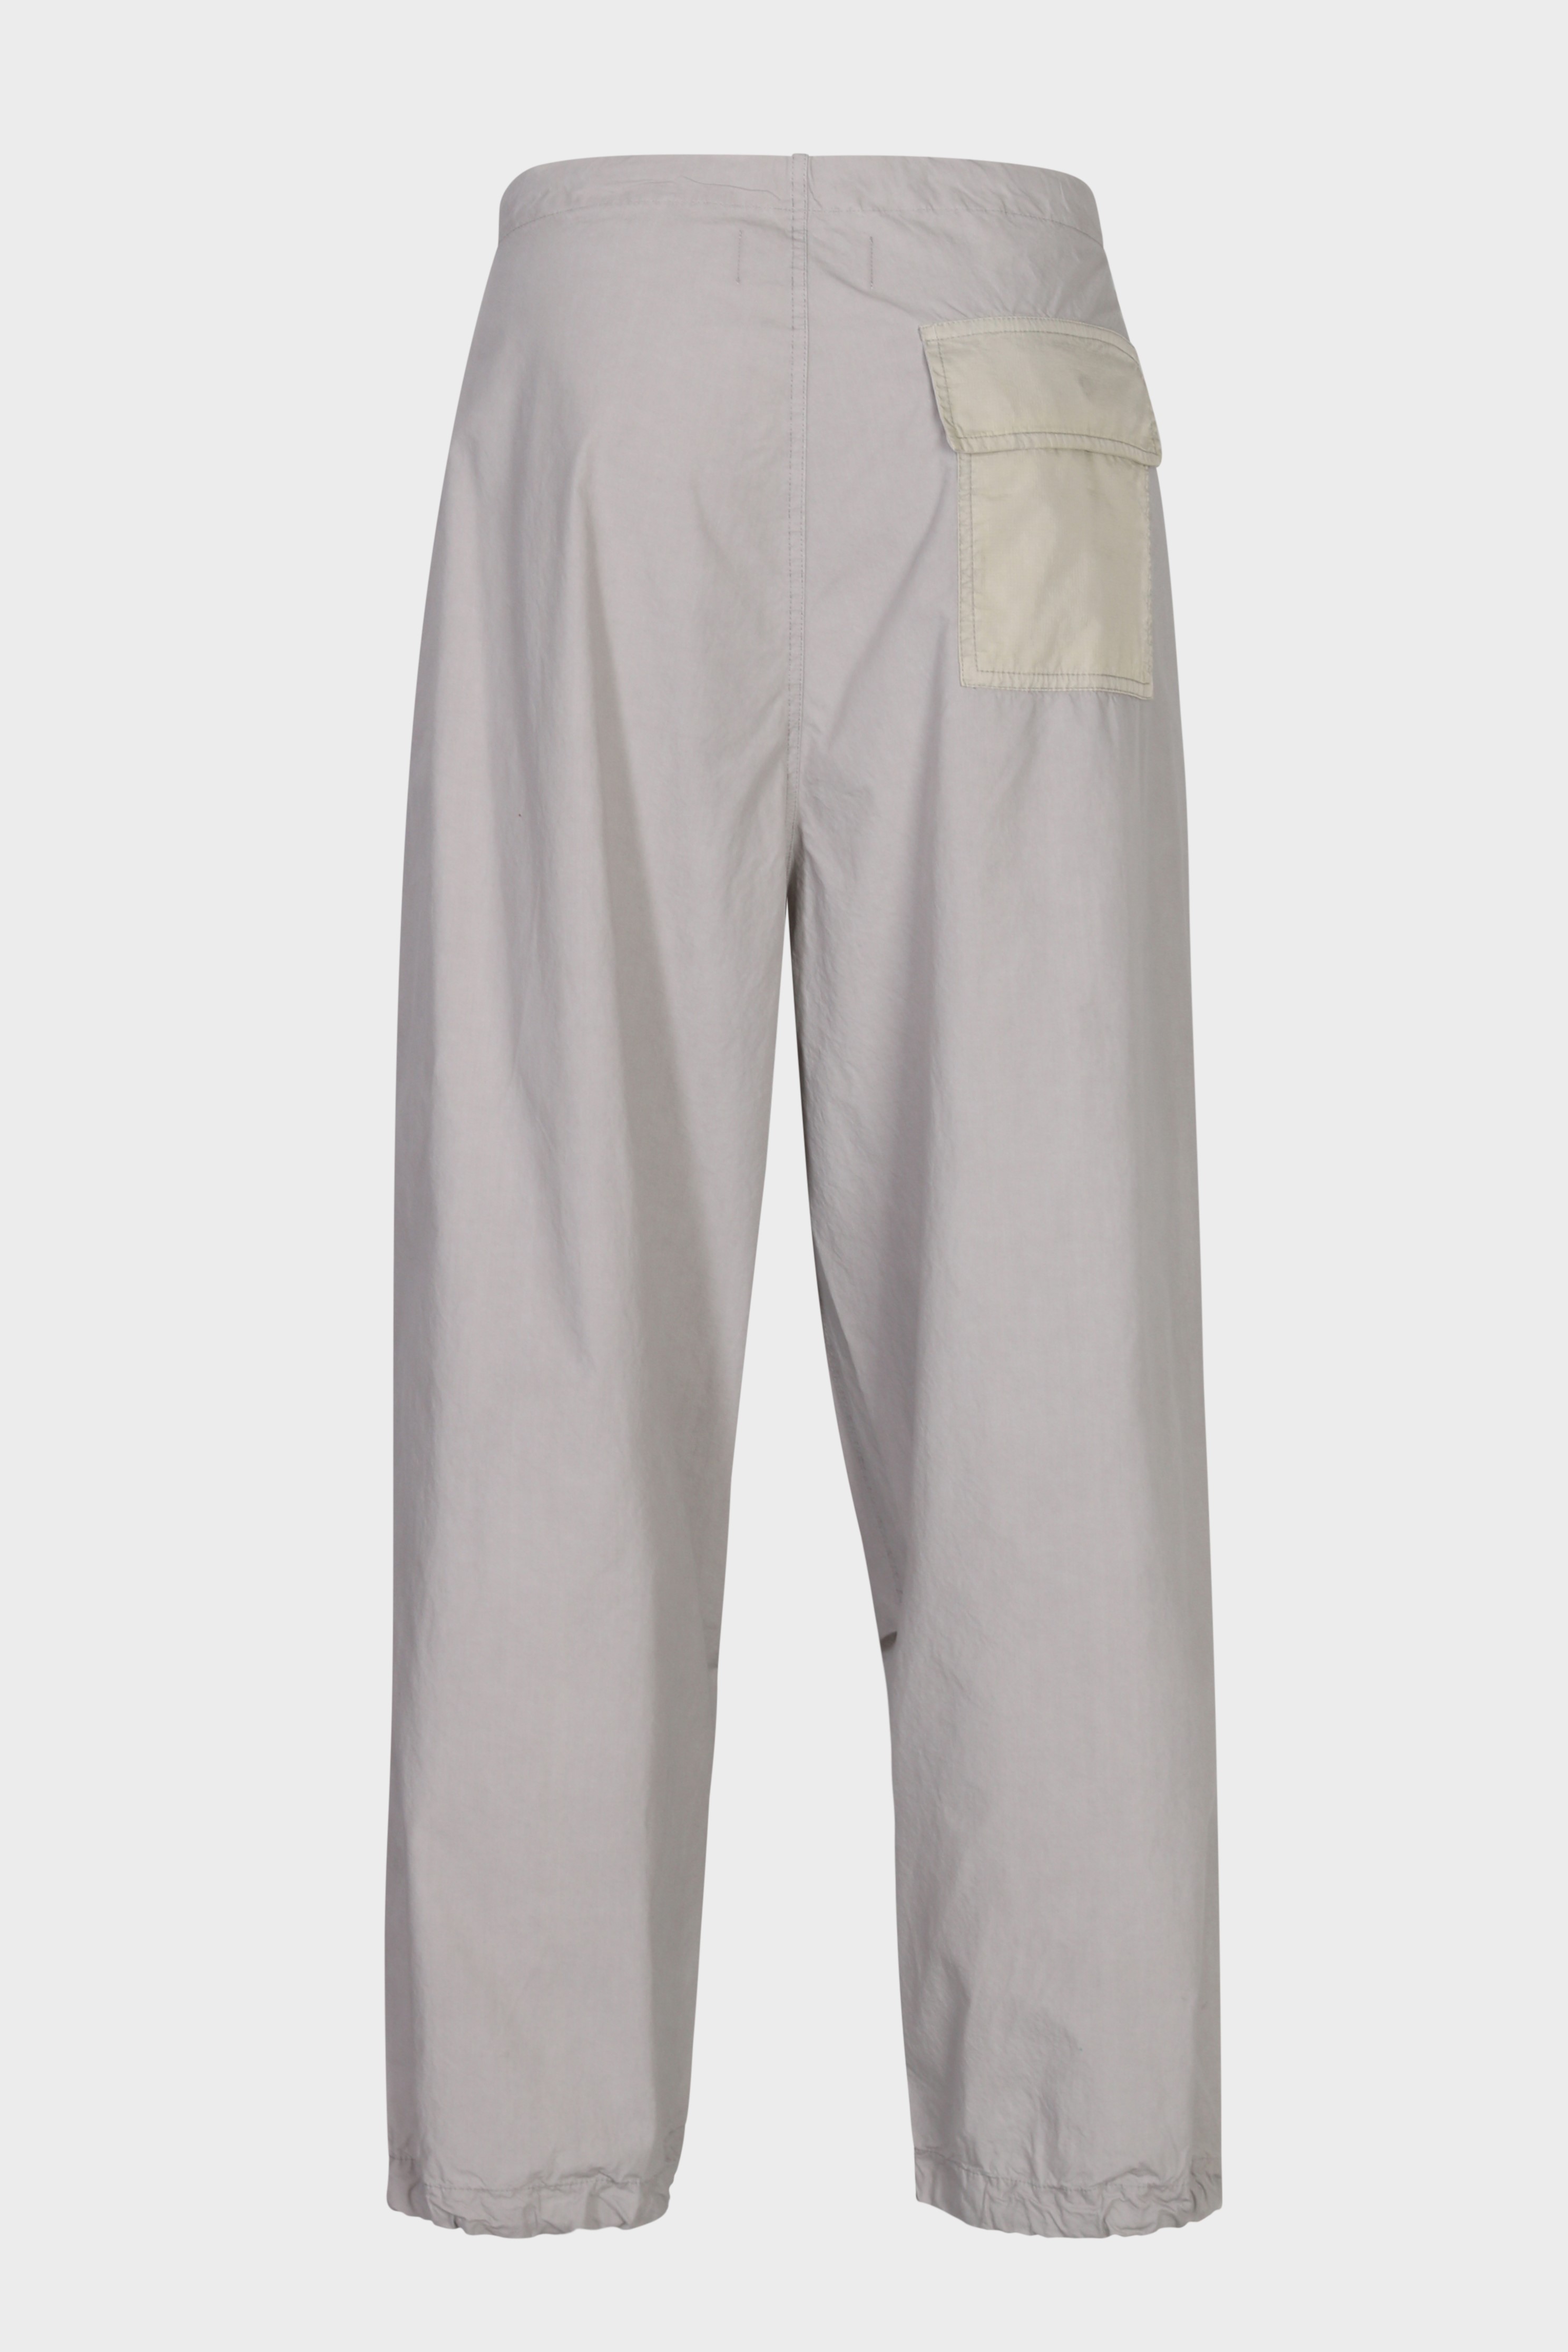 AUTRY ACTION PEOPLE Track Pant in Grey XXL